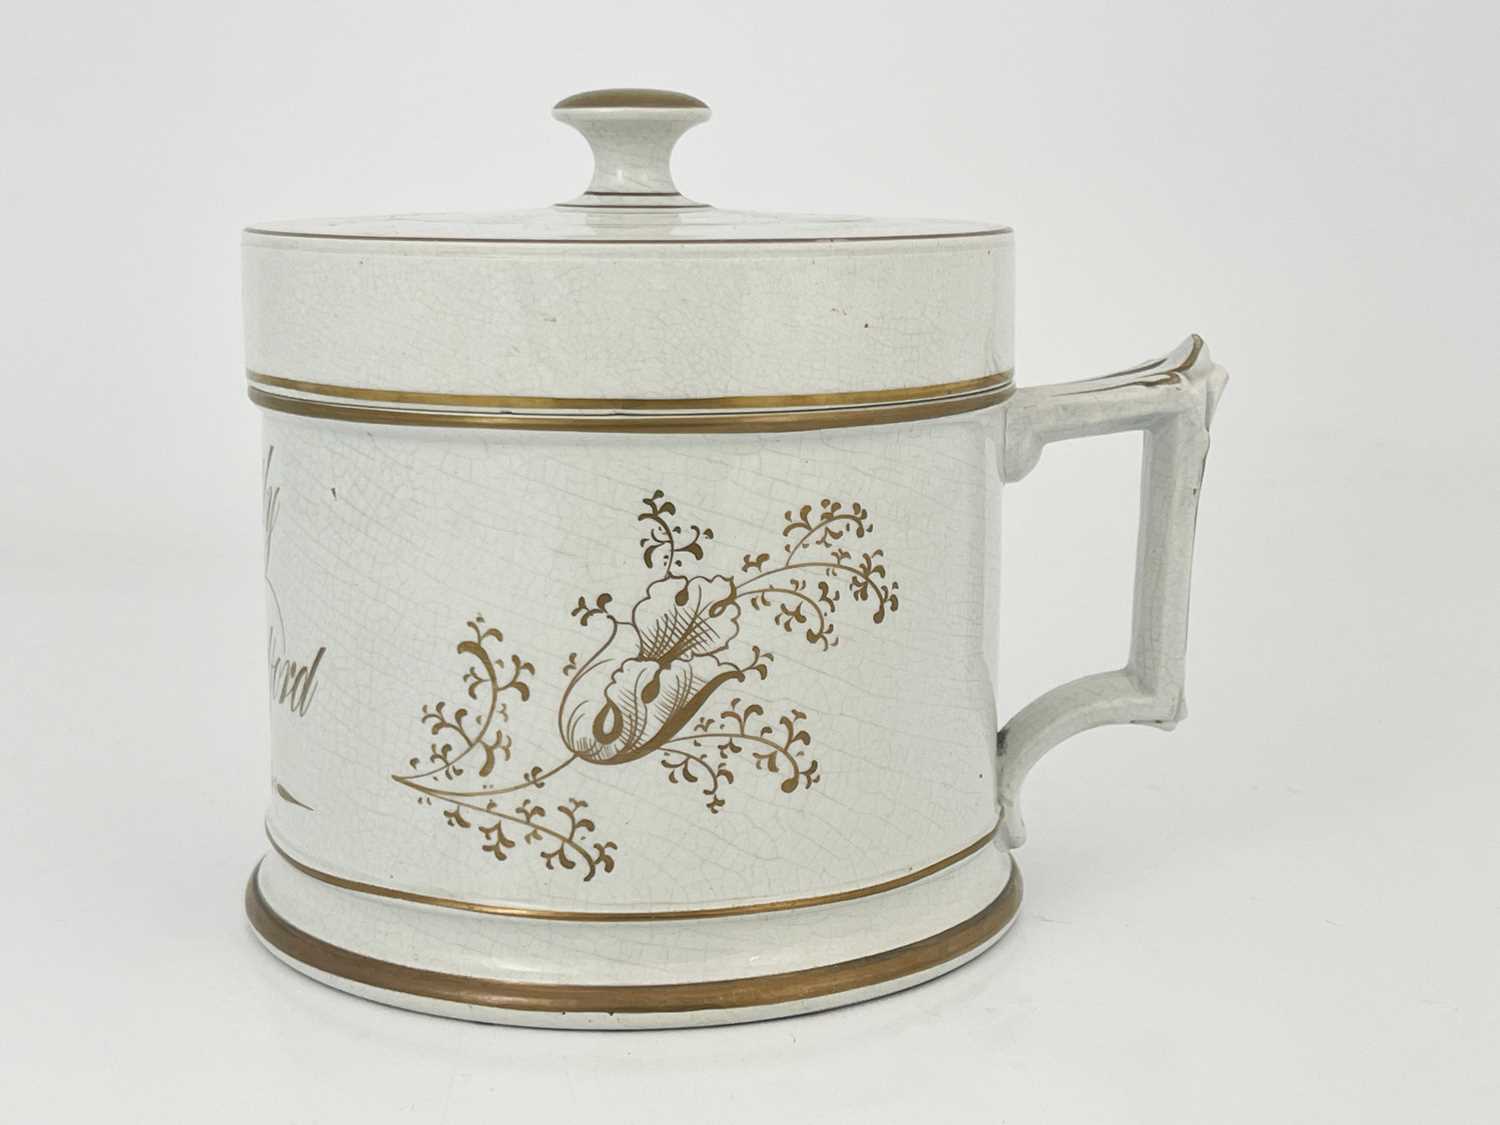 A Staffordshire pottery presentation shaving mug/tankard and cover, circa 1850, with gilded - Image 2 of 6